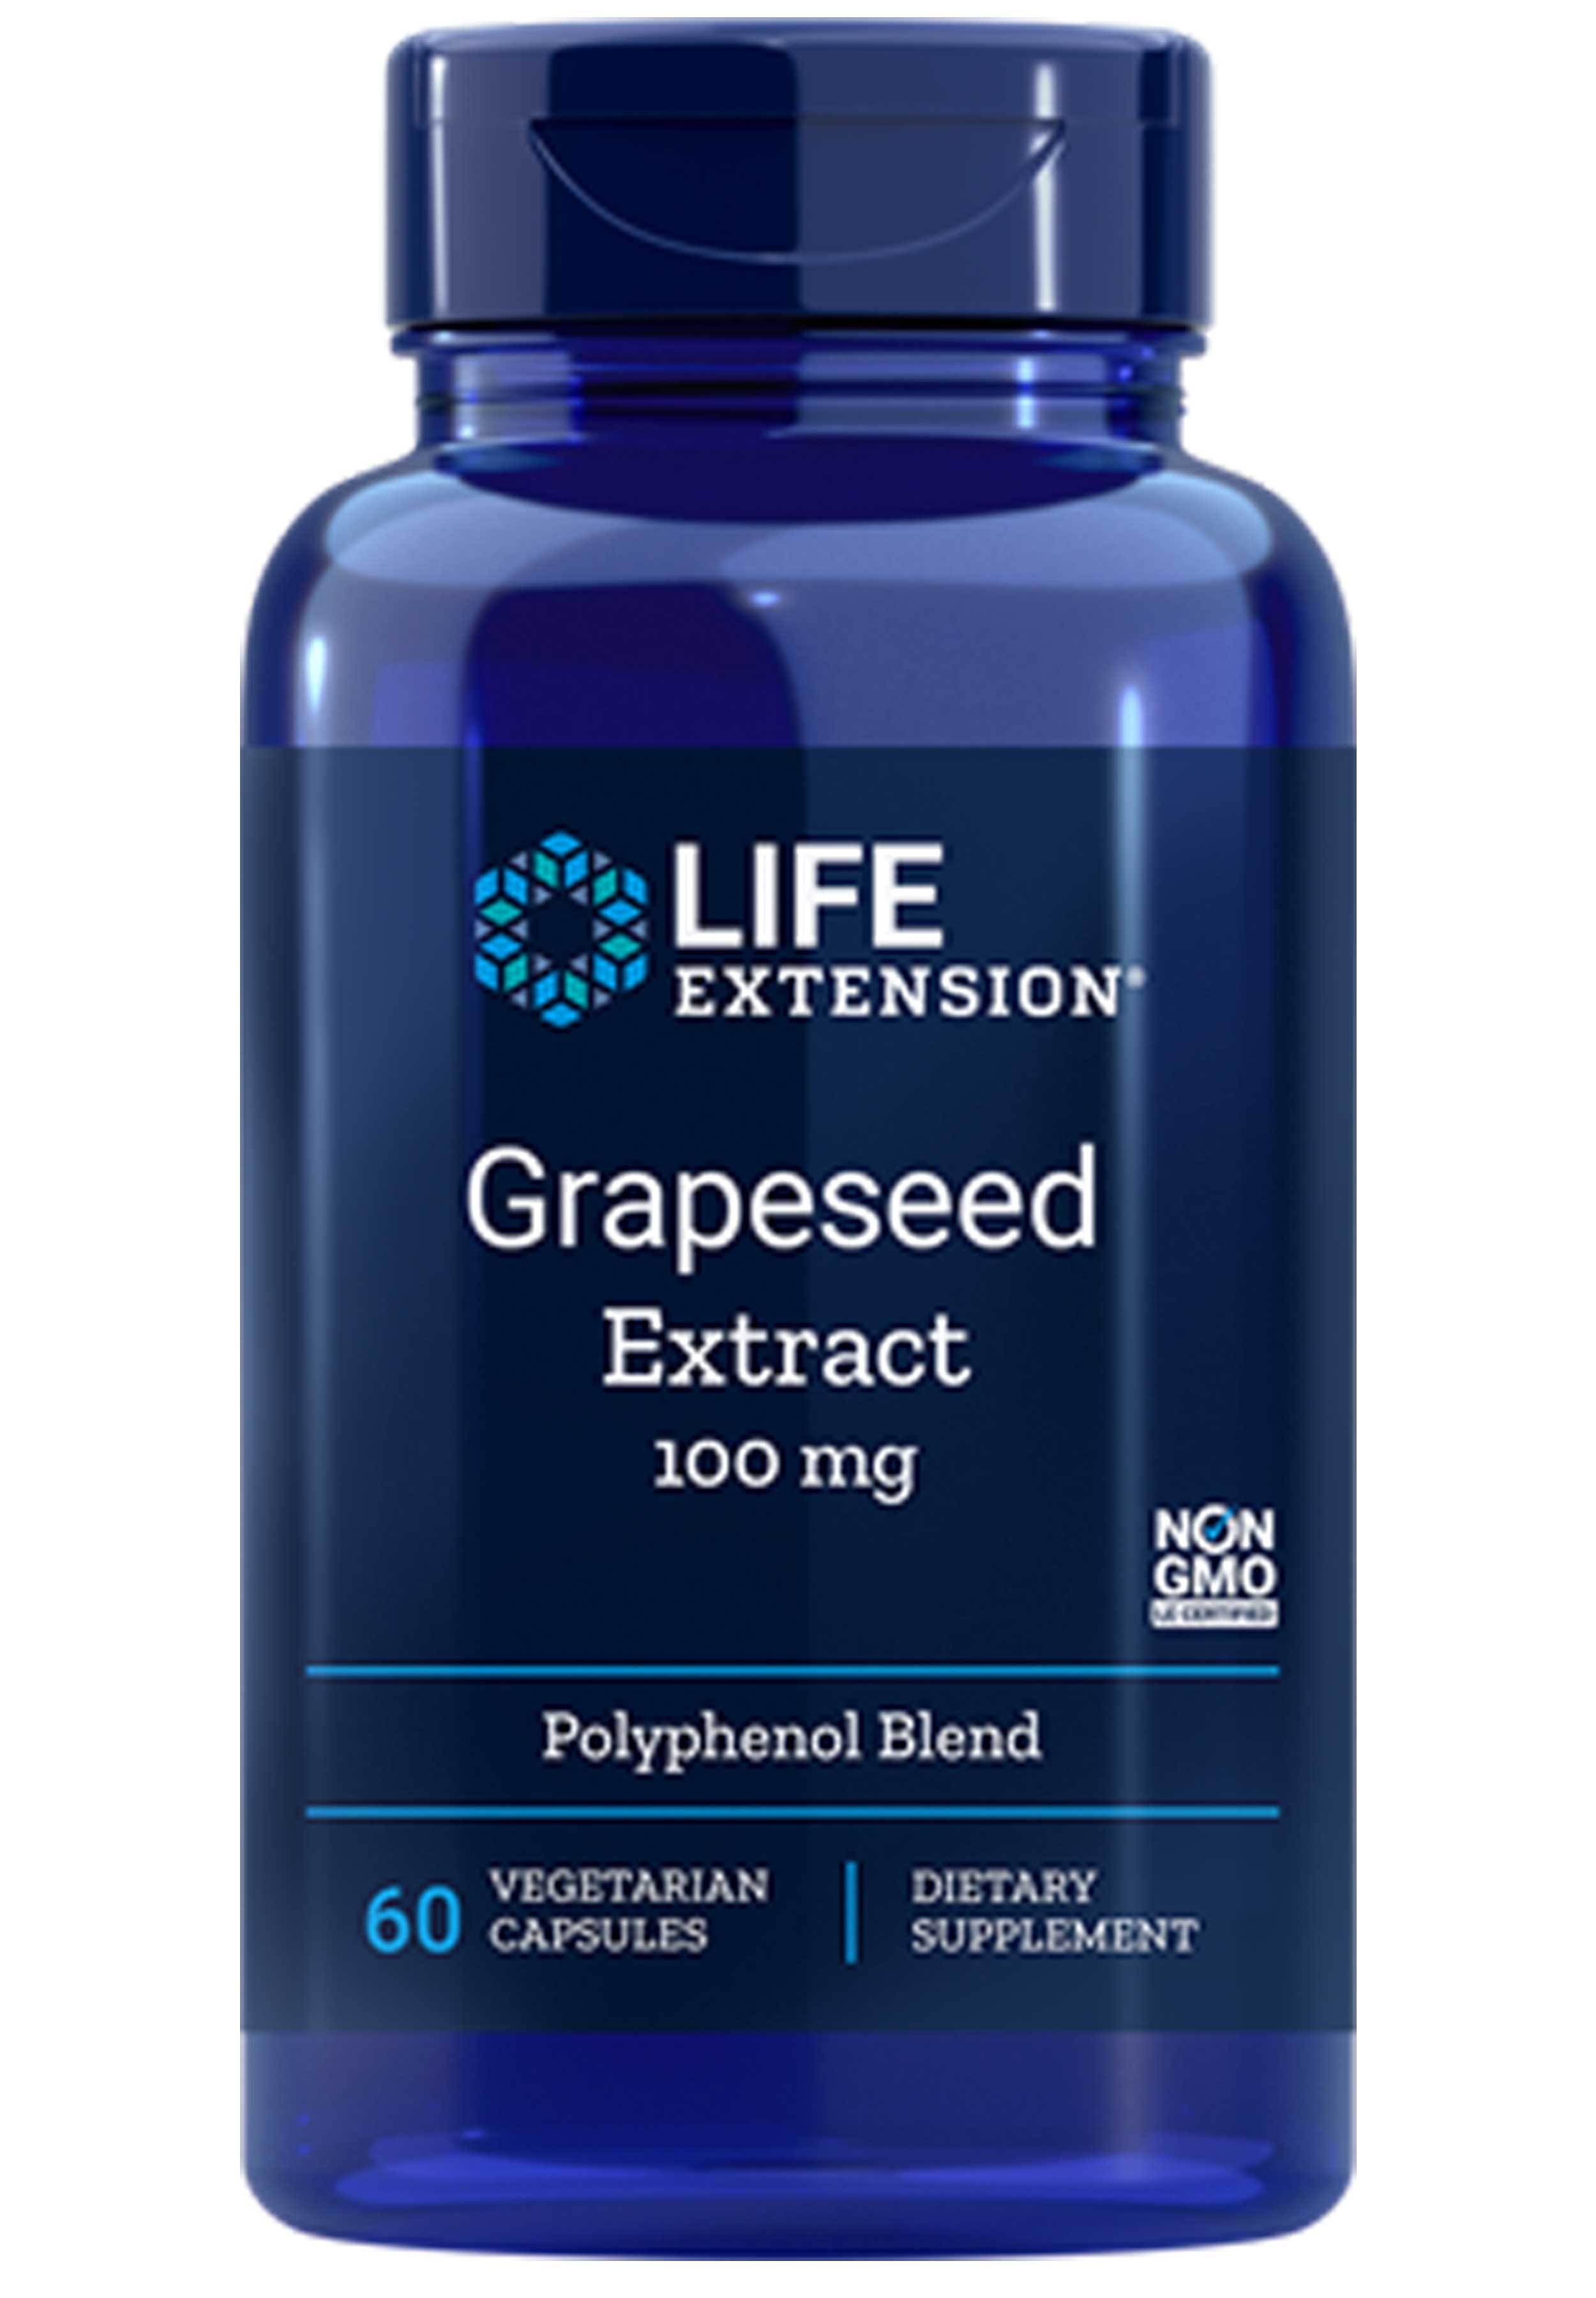 Life Extension Grapeseed Extract with Resveratrol & Pterostilbene